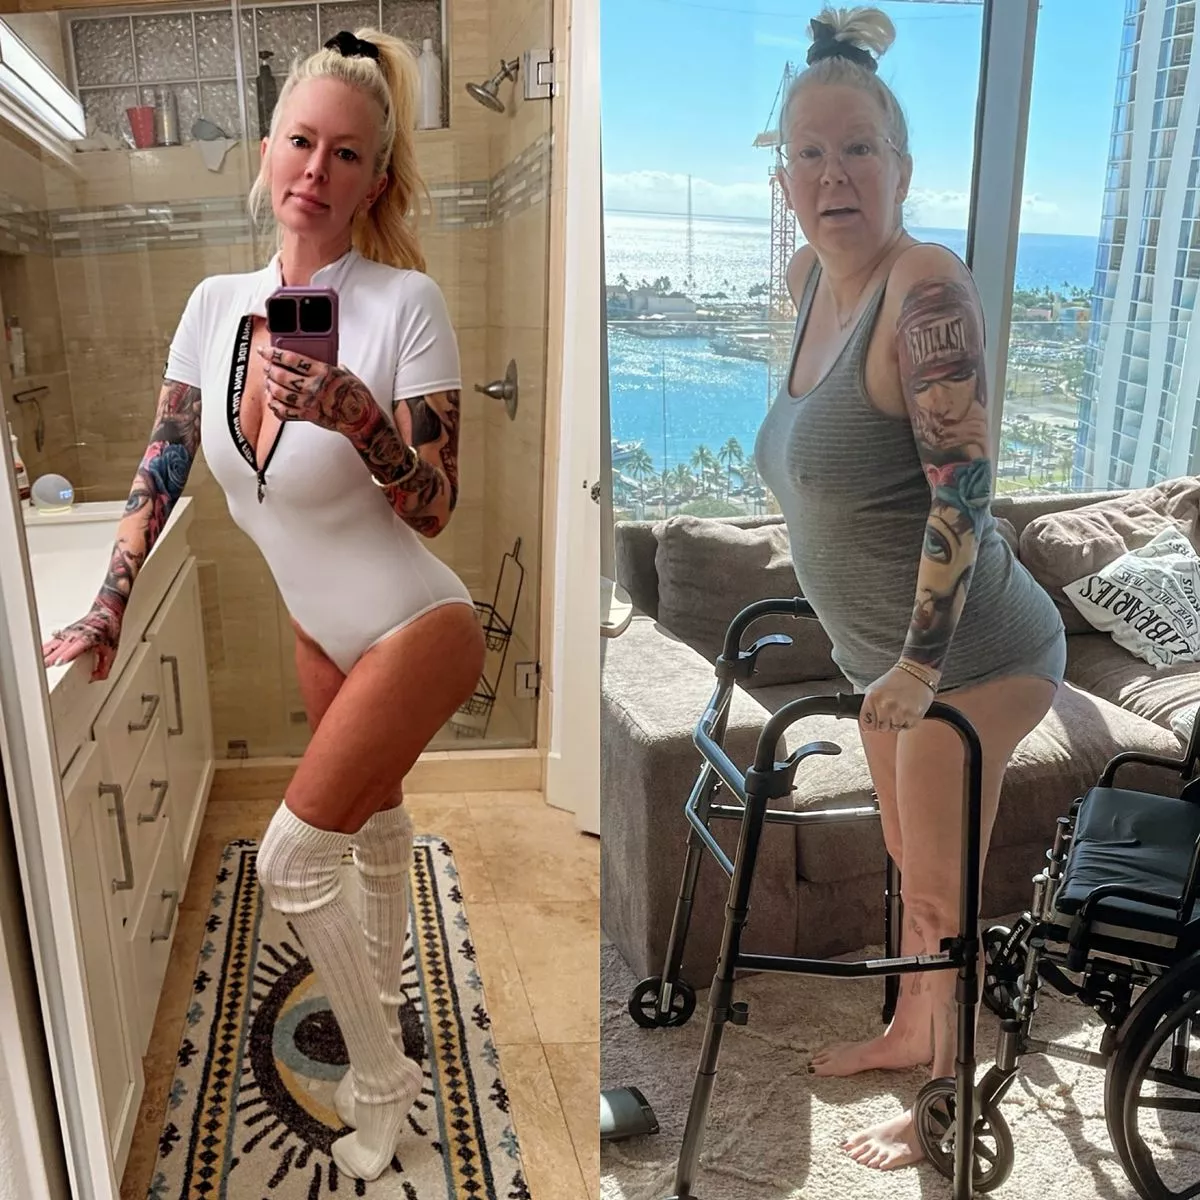 4-queen-of-porn-showcases-insane-body-transformation-after-being-left-unable-to-walk.webp